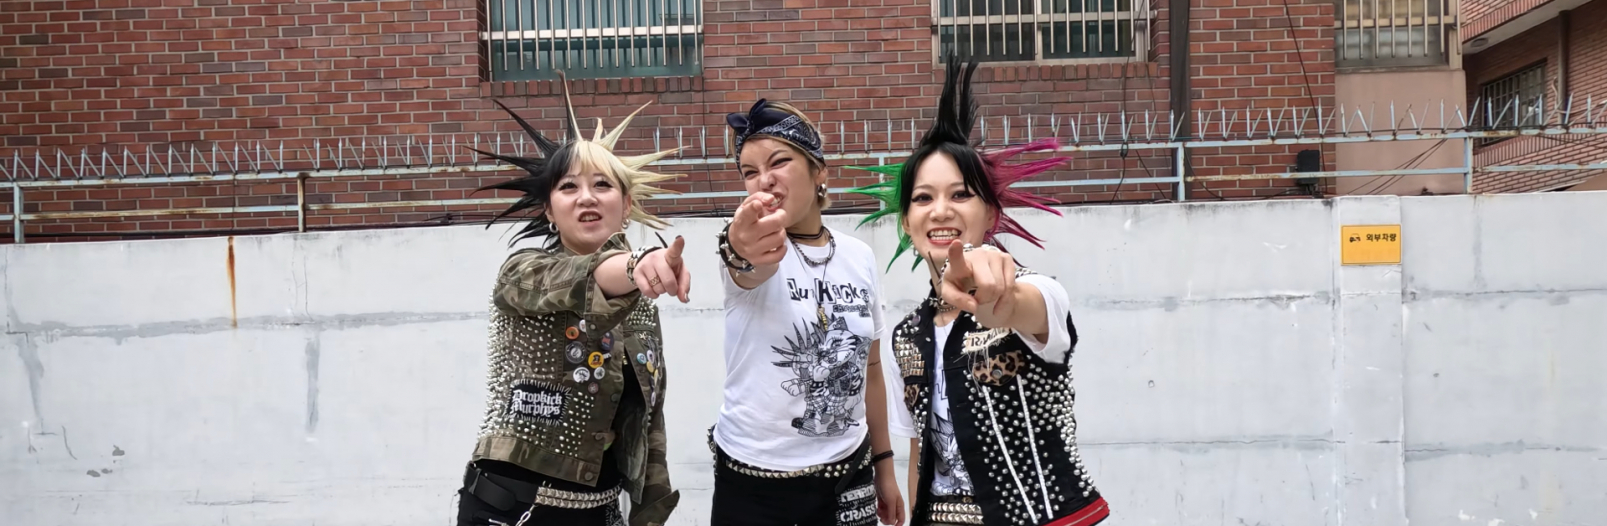 3 members of RUMKICKS are pointing at the camera. They are all dressed up in punk rock gear. The members on the left and right have spiked hair, while the middle member is wearing a bandana around her head that is tied in the front.